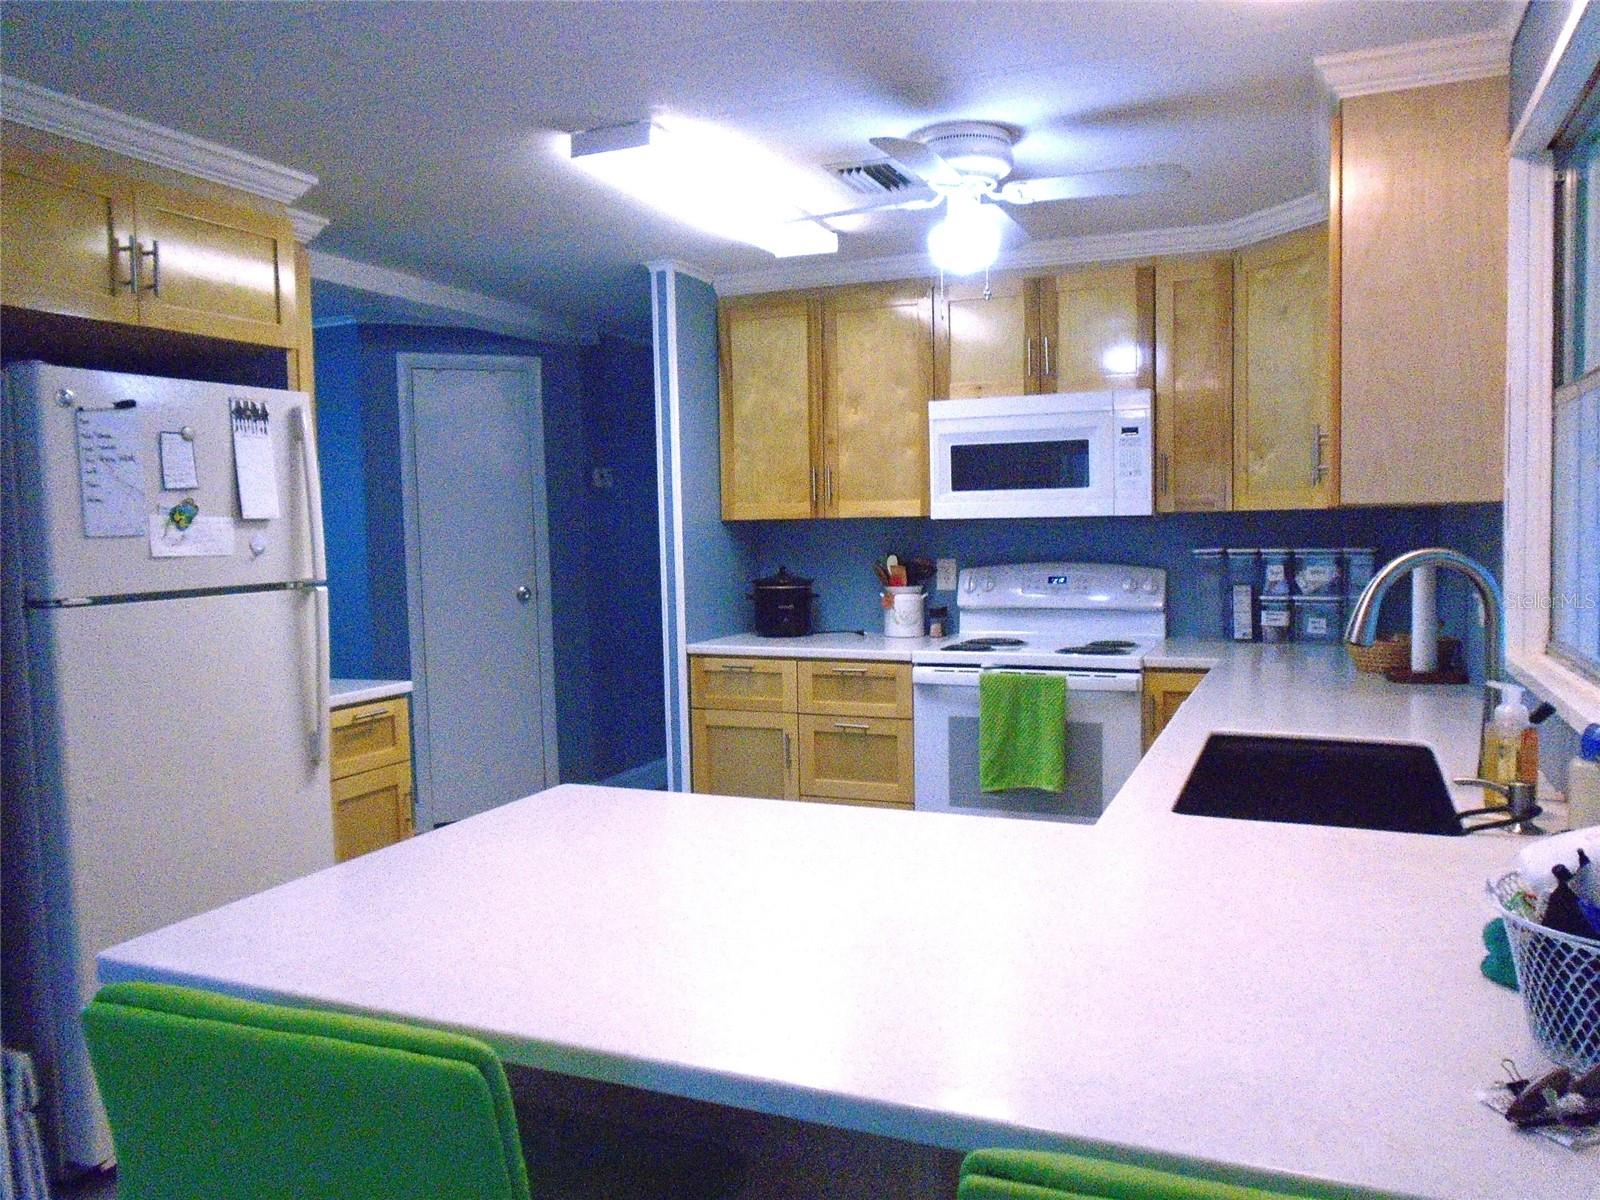 Room for Two in the Remodeled Kitchen * Solid Wood Soft Close Cabinets * Quartz Counter Tops * Recessed Sink